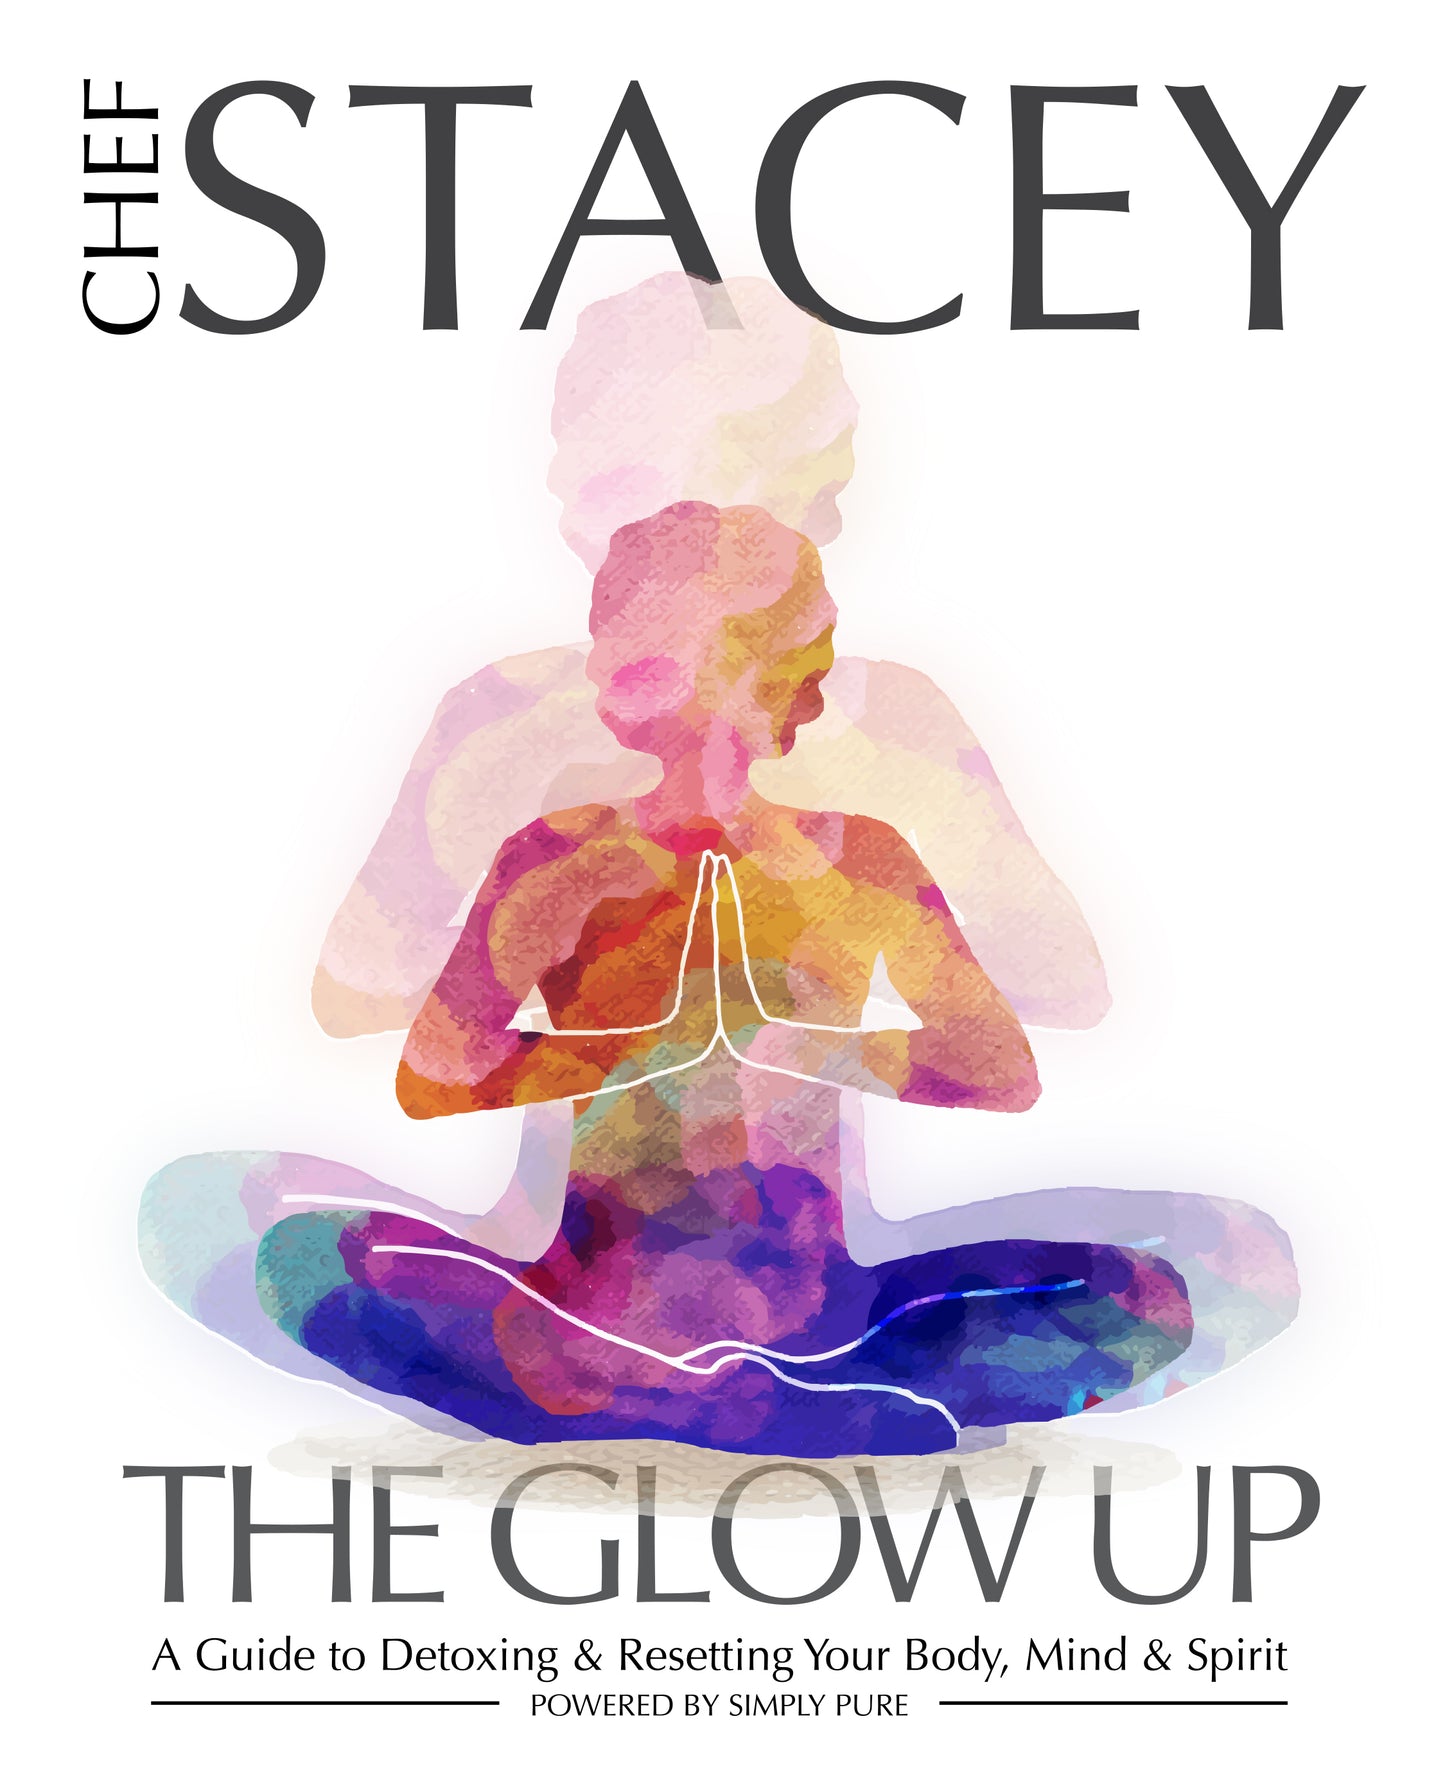 The Glow Up - A 3 Day Liquid Cleanse by Chef Stacey Dougan (Hardcopy)